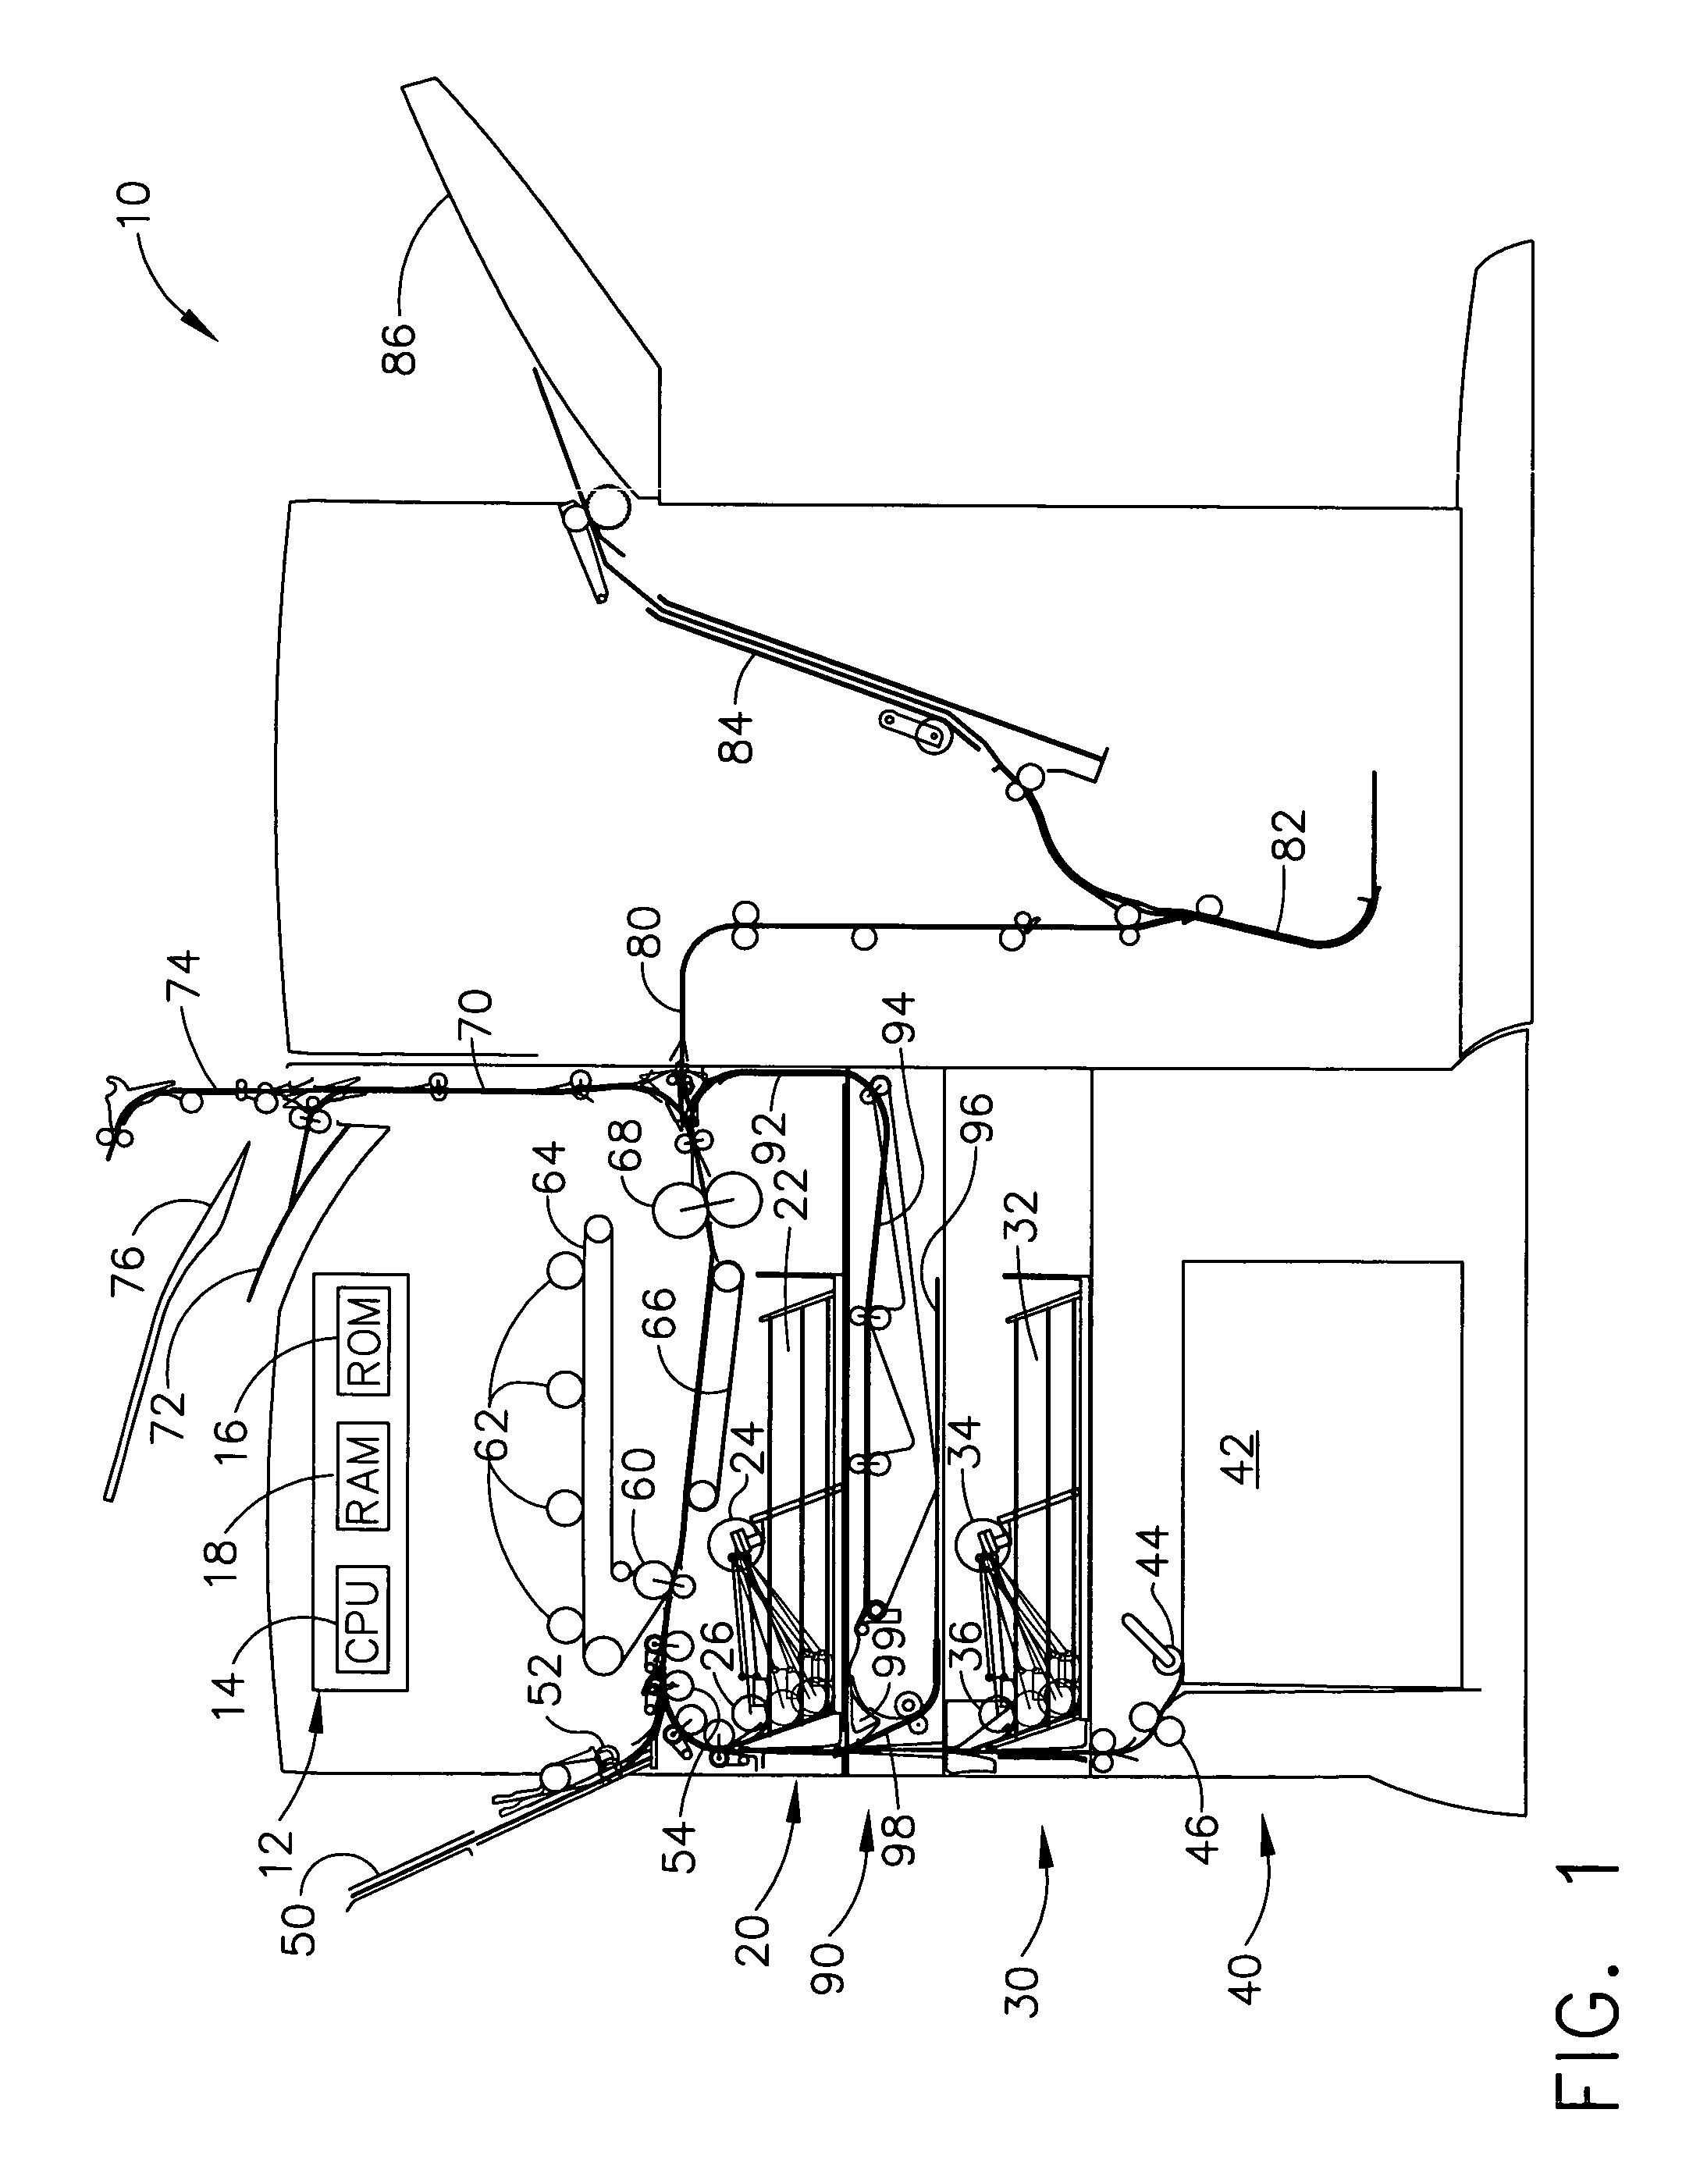 Method and apparatus for adhering sheets of print media together by use of toner in an electrophotographic printer